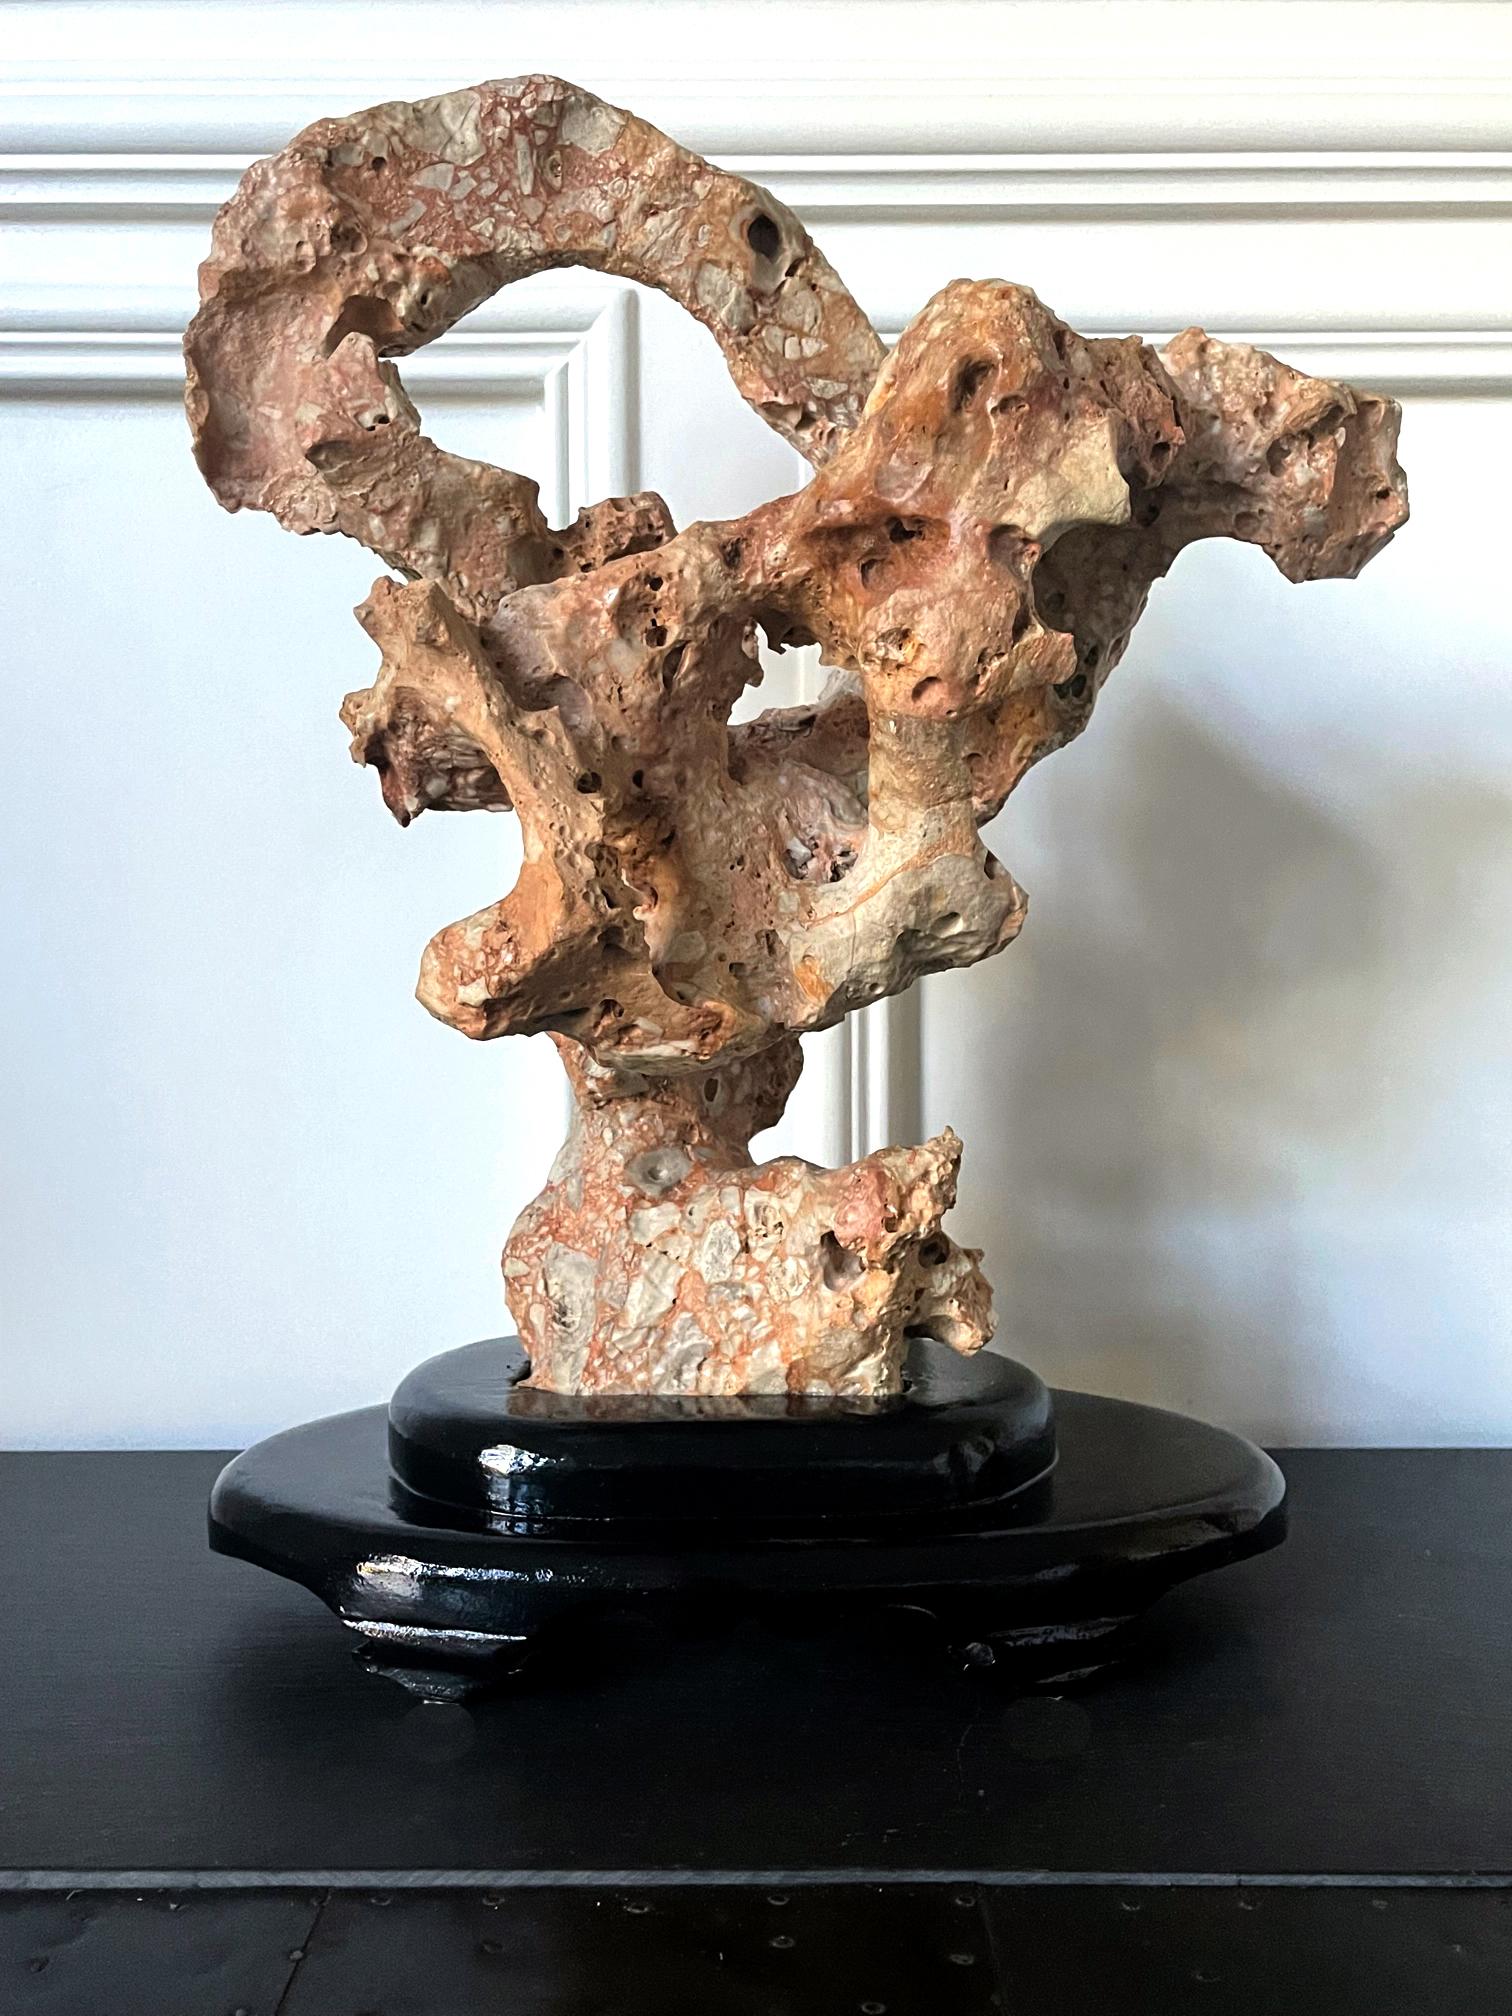 A Chinese scholar stone in an upright mushroom form displayed on a custom wood stand. Wonderful and well-balanced, the ocher and cream color stone is likely of the Taihu type. It showcases an unusual, aggregated body with highly textured surface.